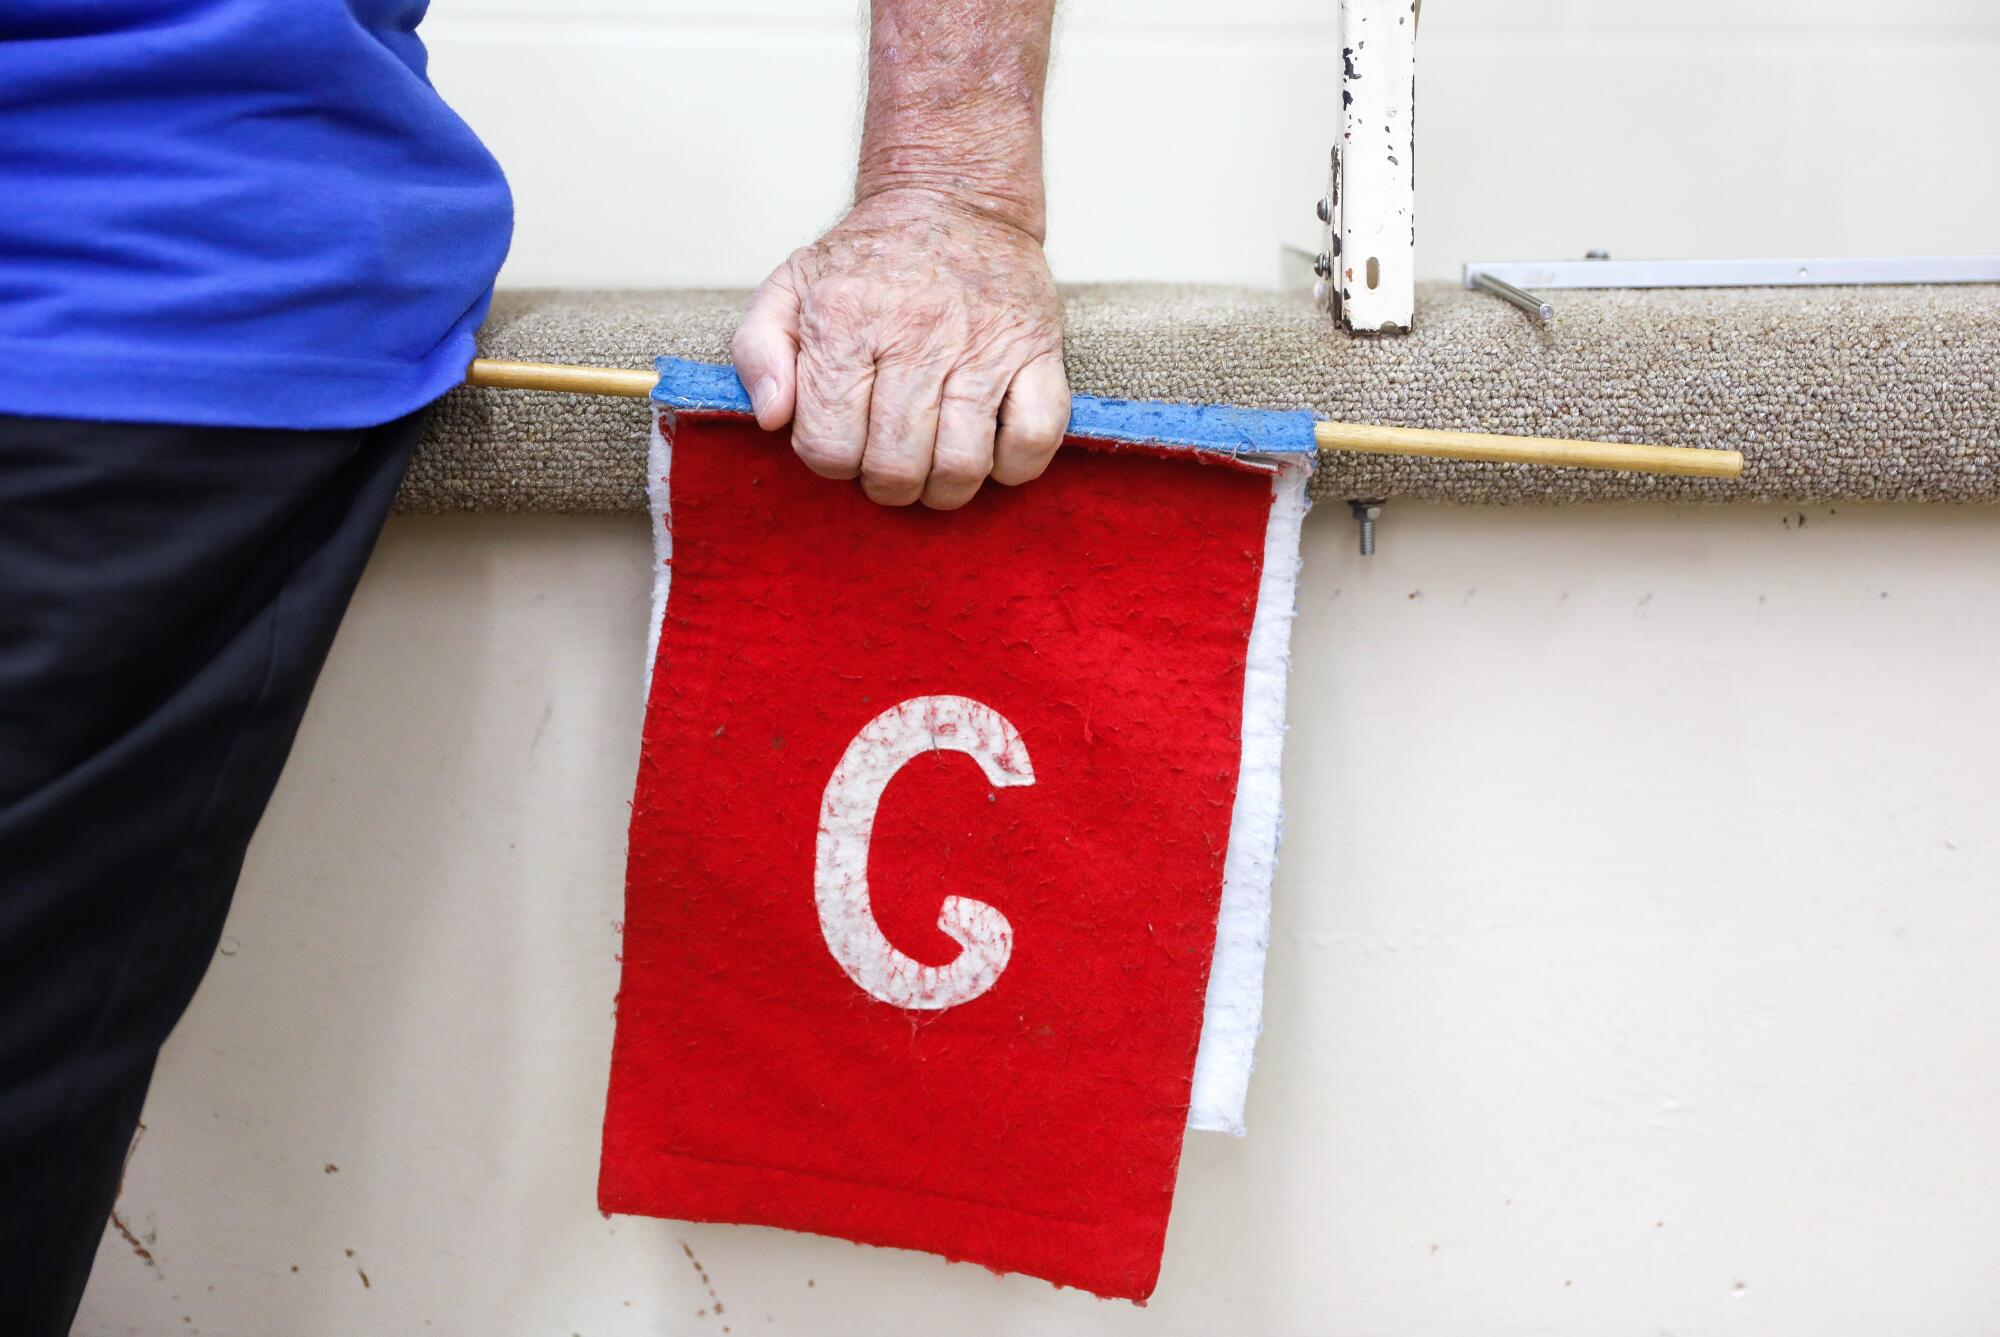 A man has his hand on a red flag with the letter G.